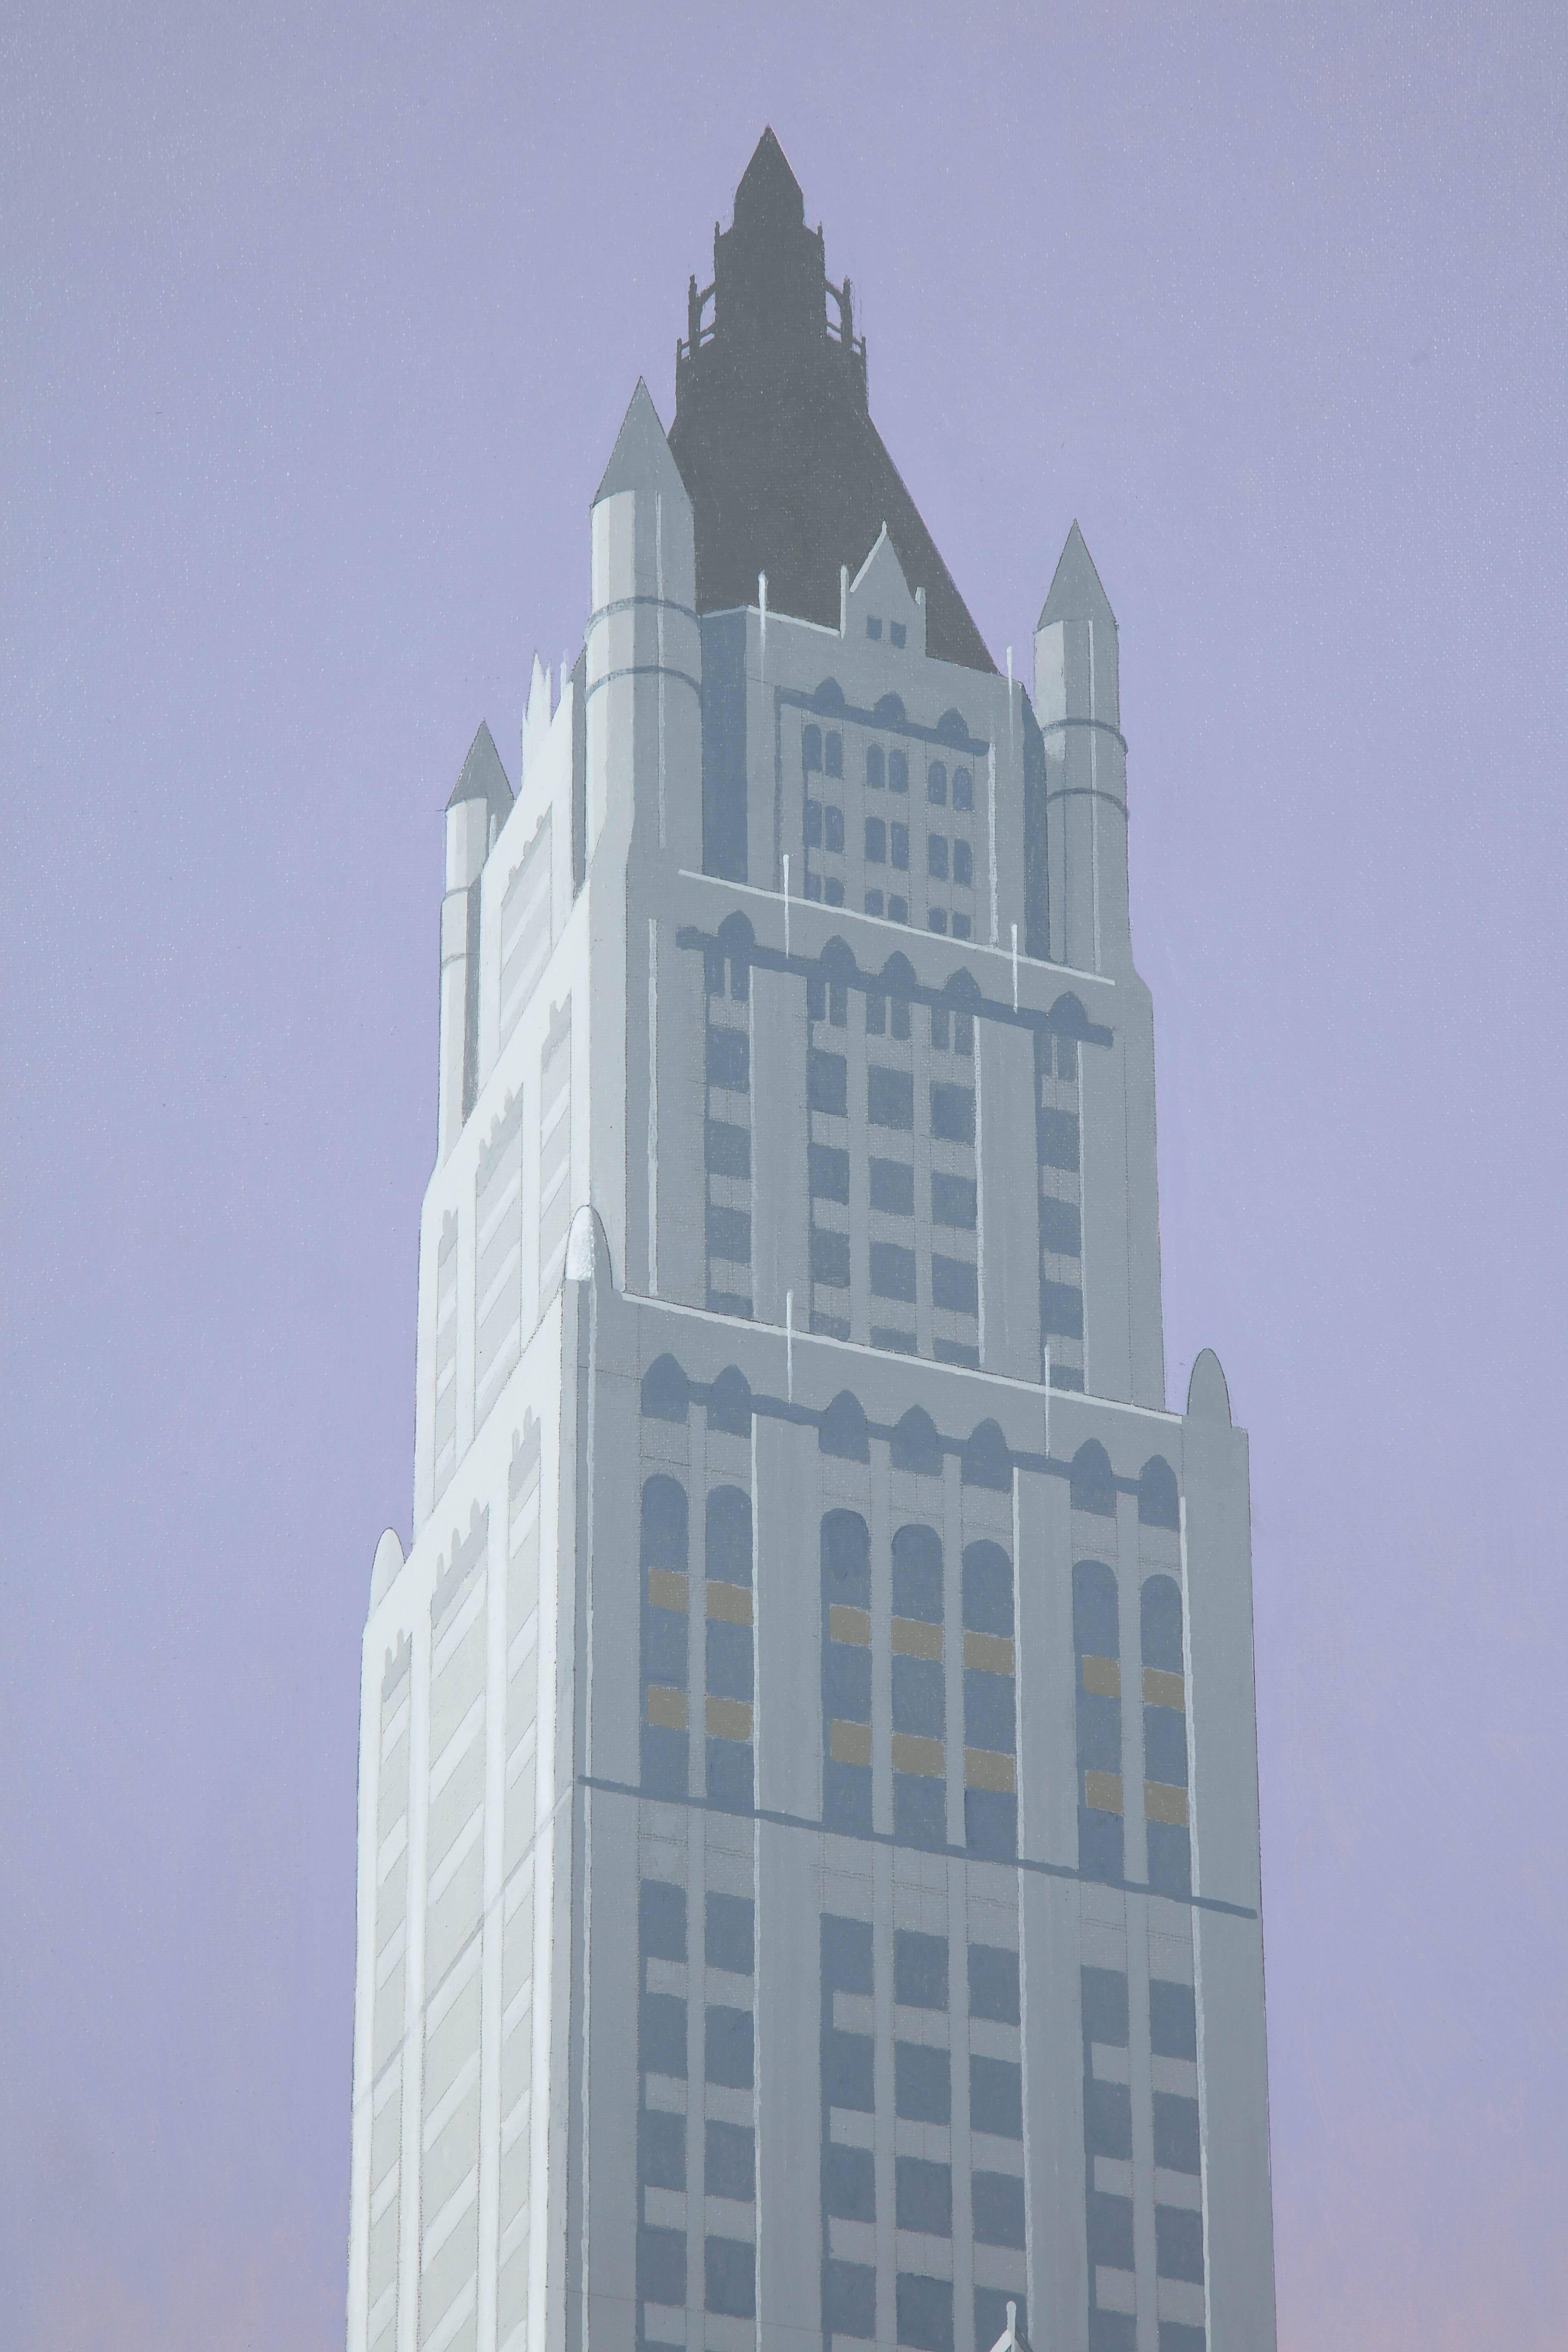 Woolworth. An original painting by Lynn Curlee

This,painting was used as an illustration in skyscraper, an award winning book for children by author/illustrator Lynn Curlee

It is acrylic on canvas. The edges are fully finished and painted so